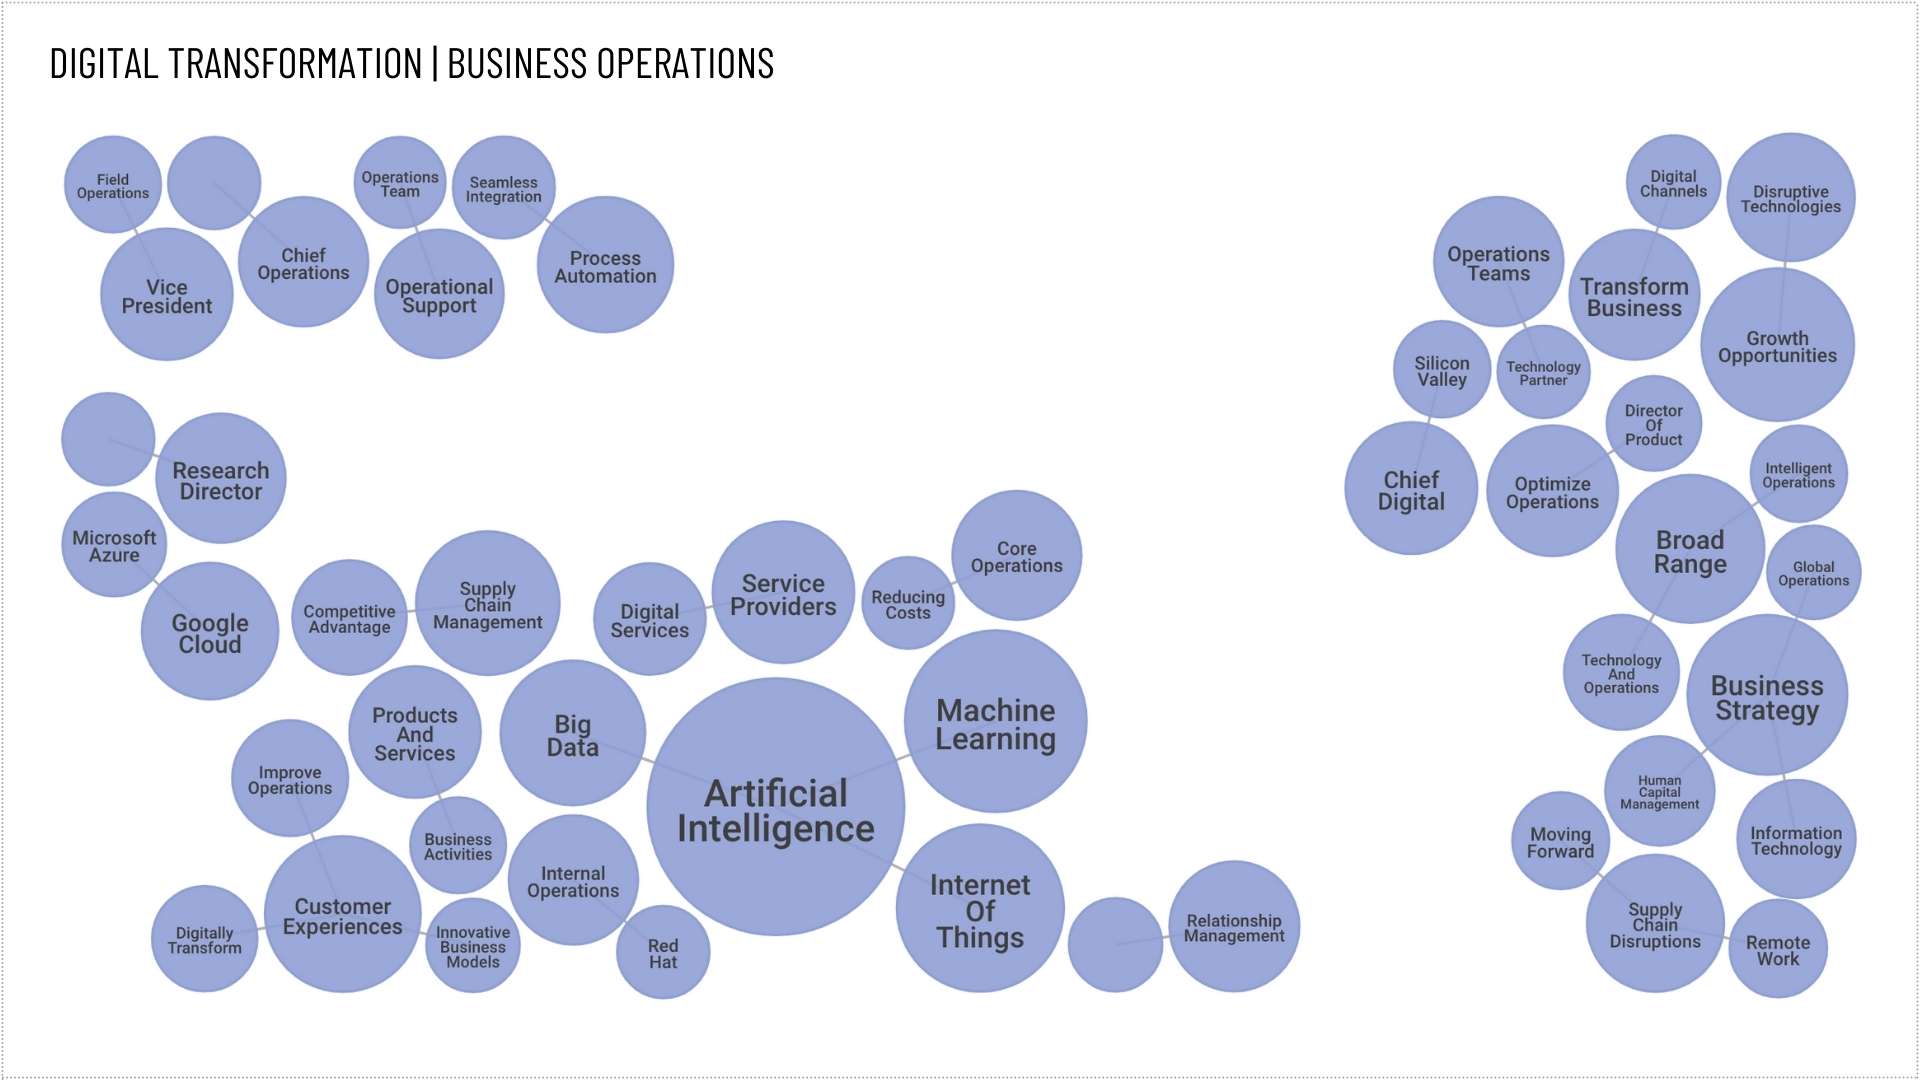 Business Operations Analysis of Digital Transformation Topics